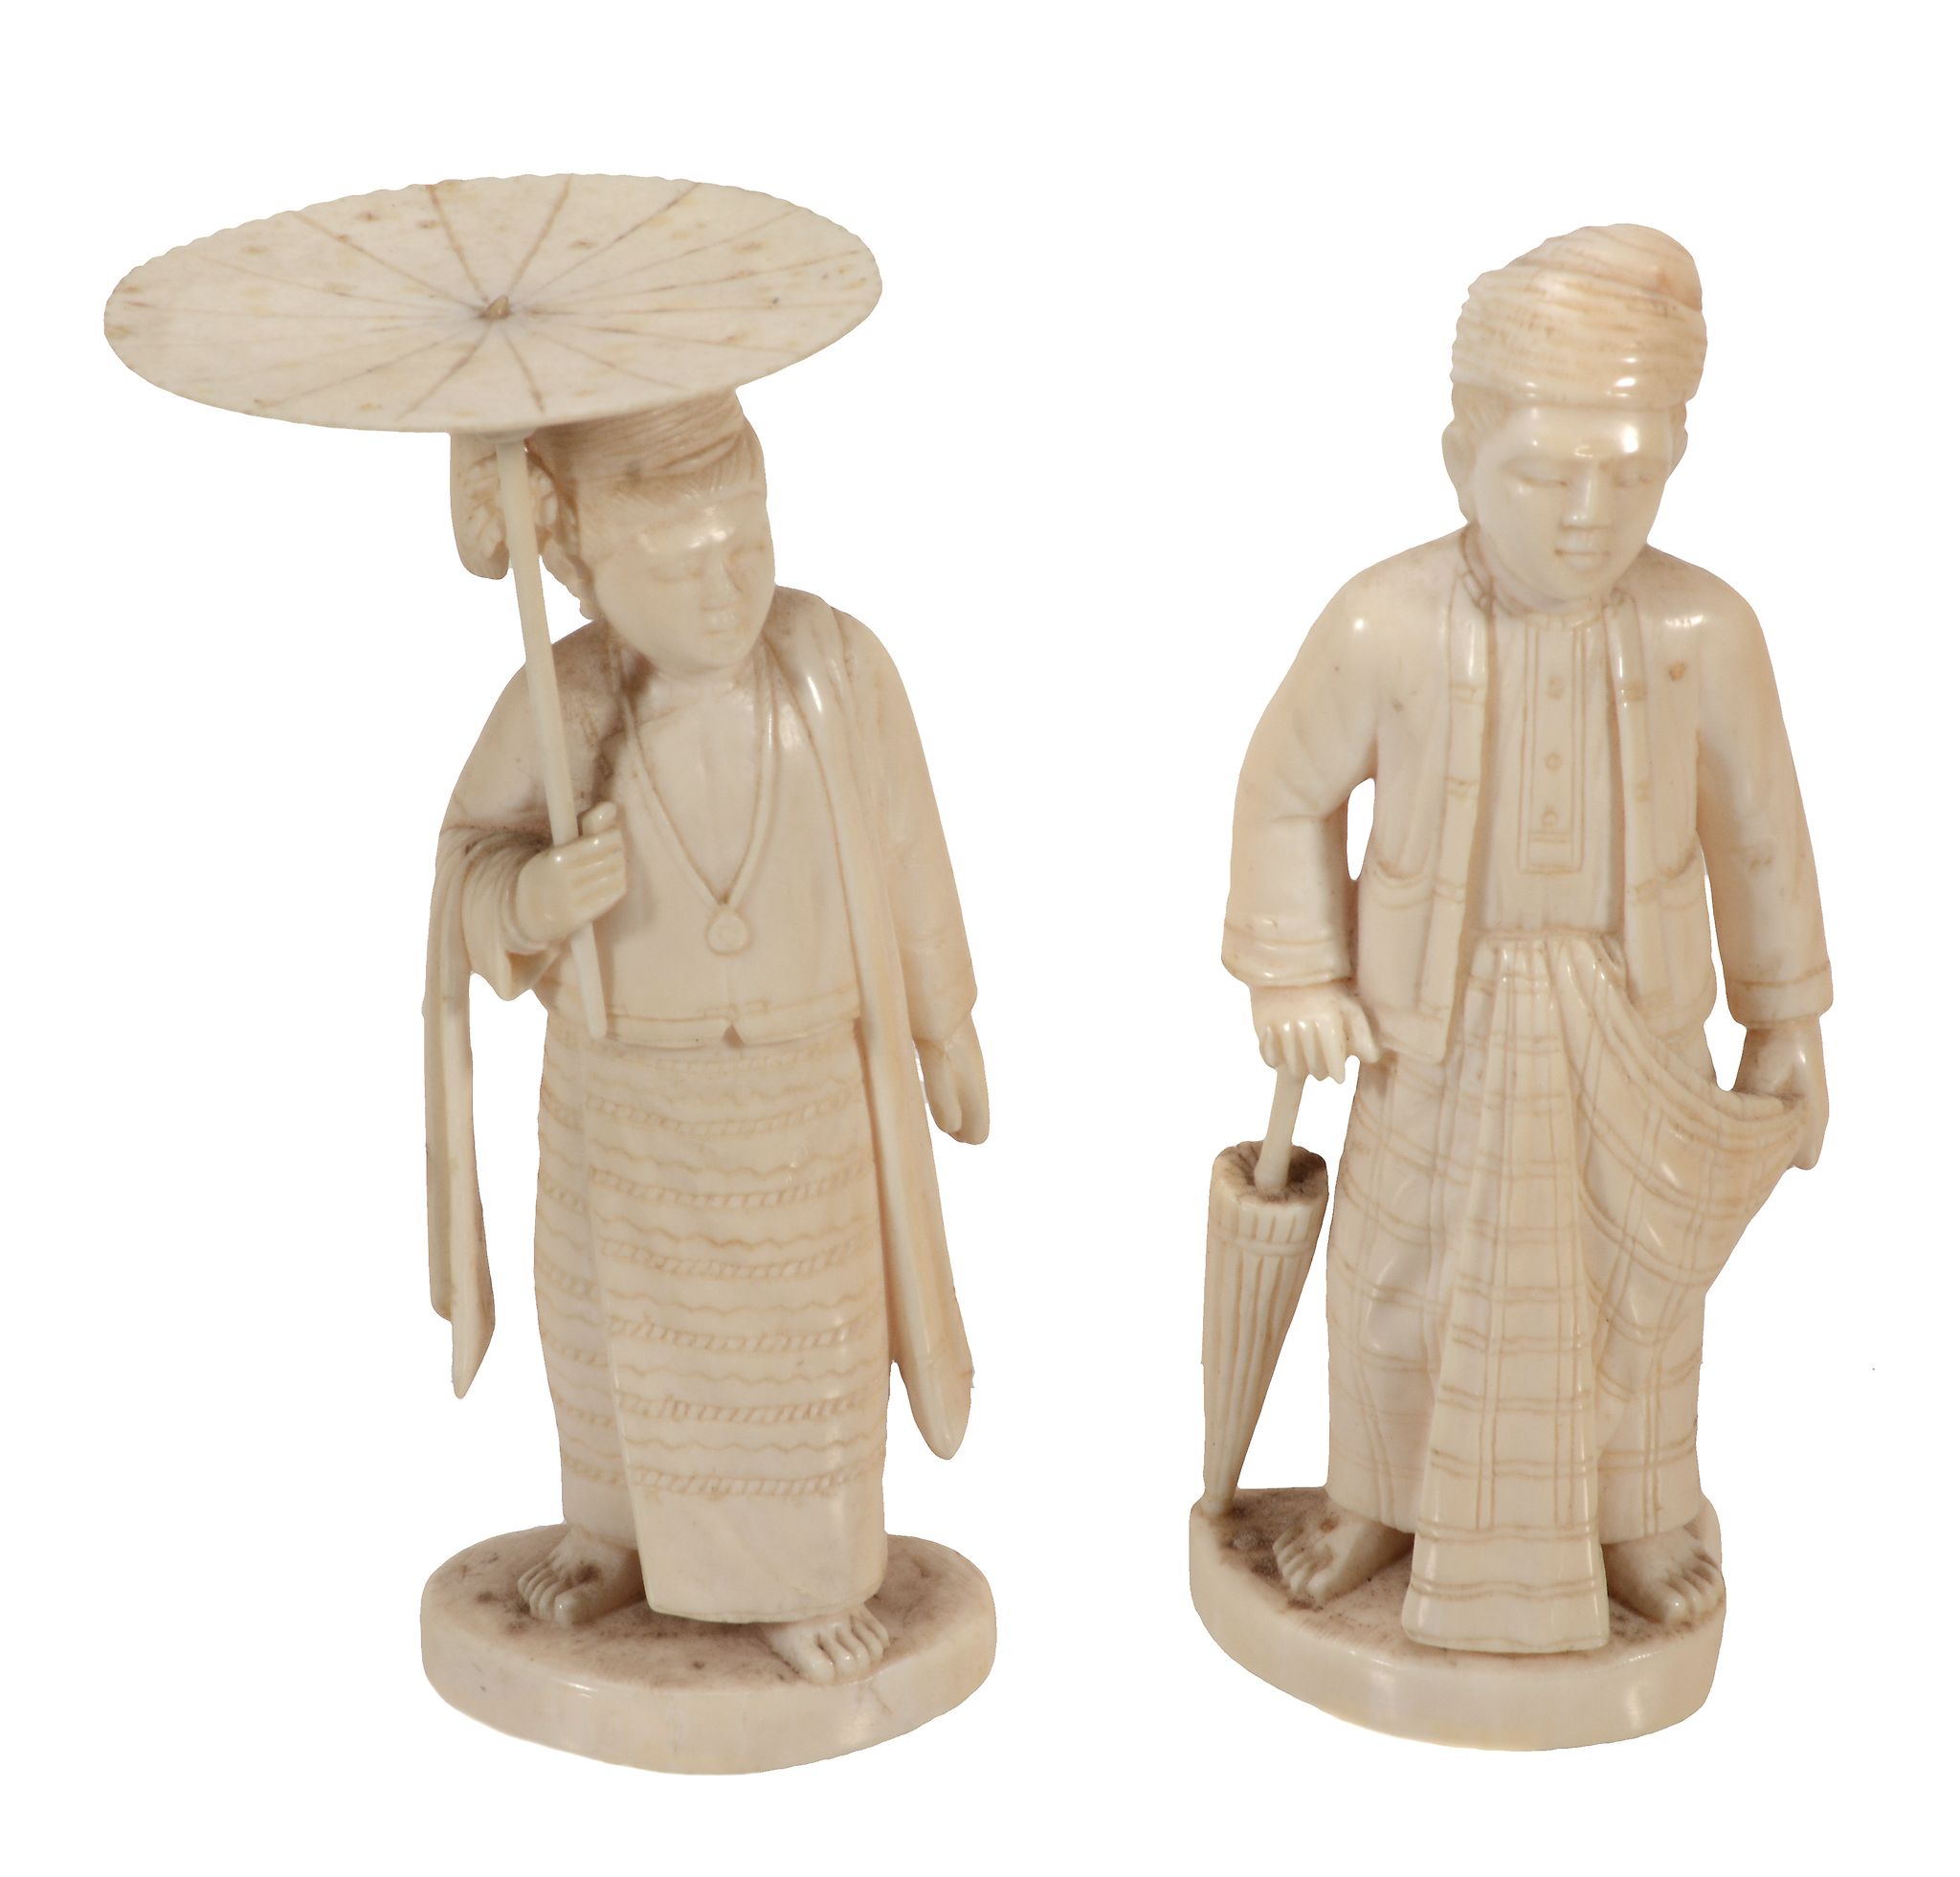 Two Indian Ivory Figures, each carved to depict a standing man dress in...  Two Indian Ivory